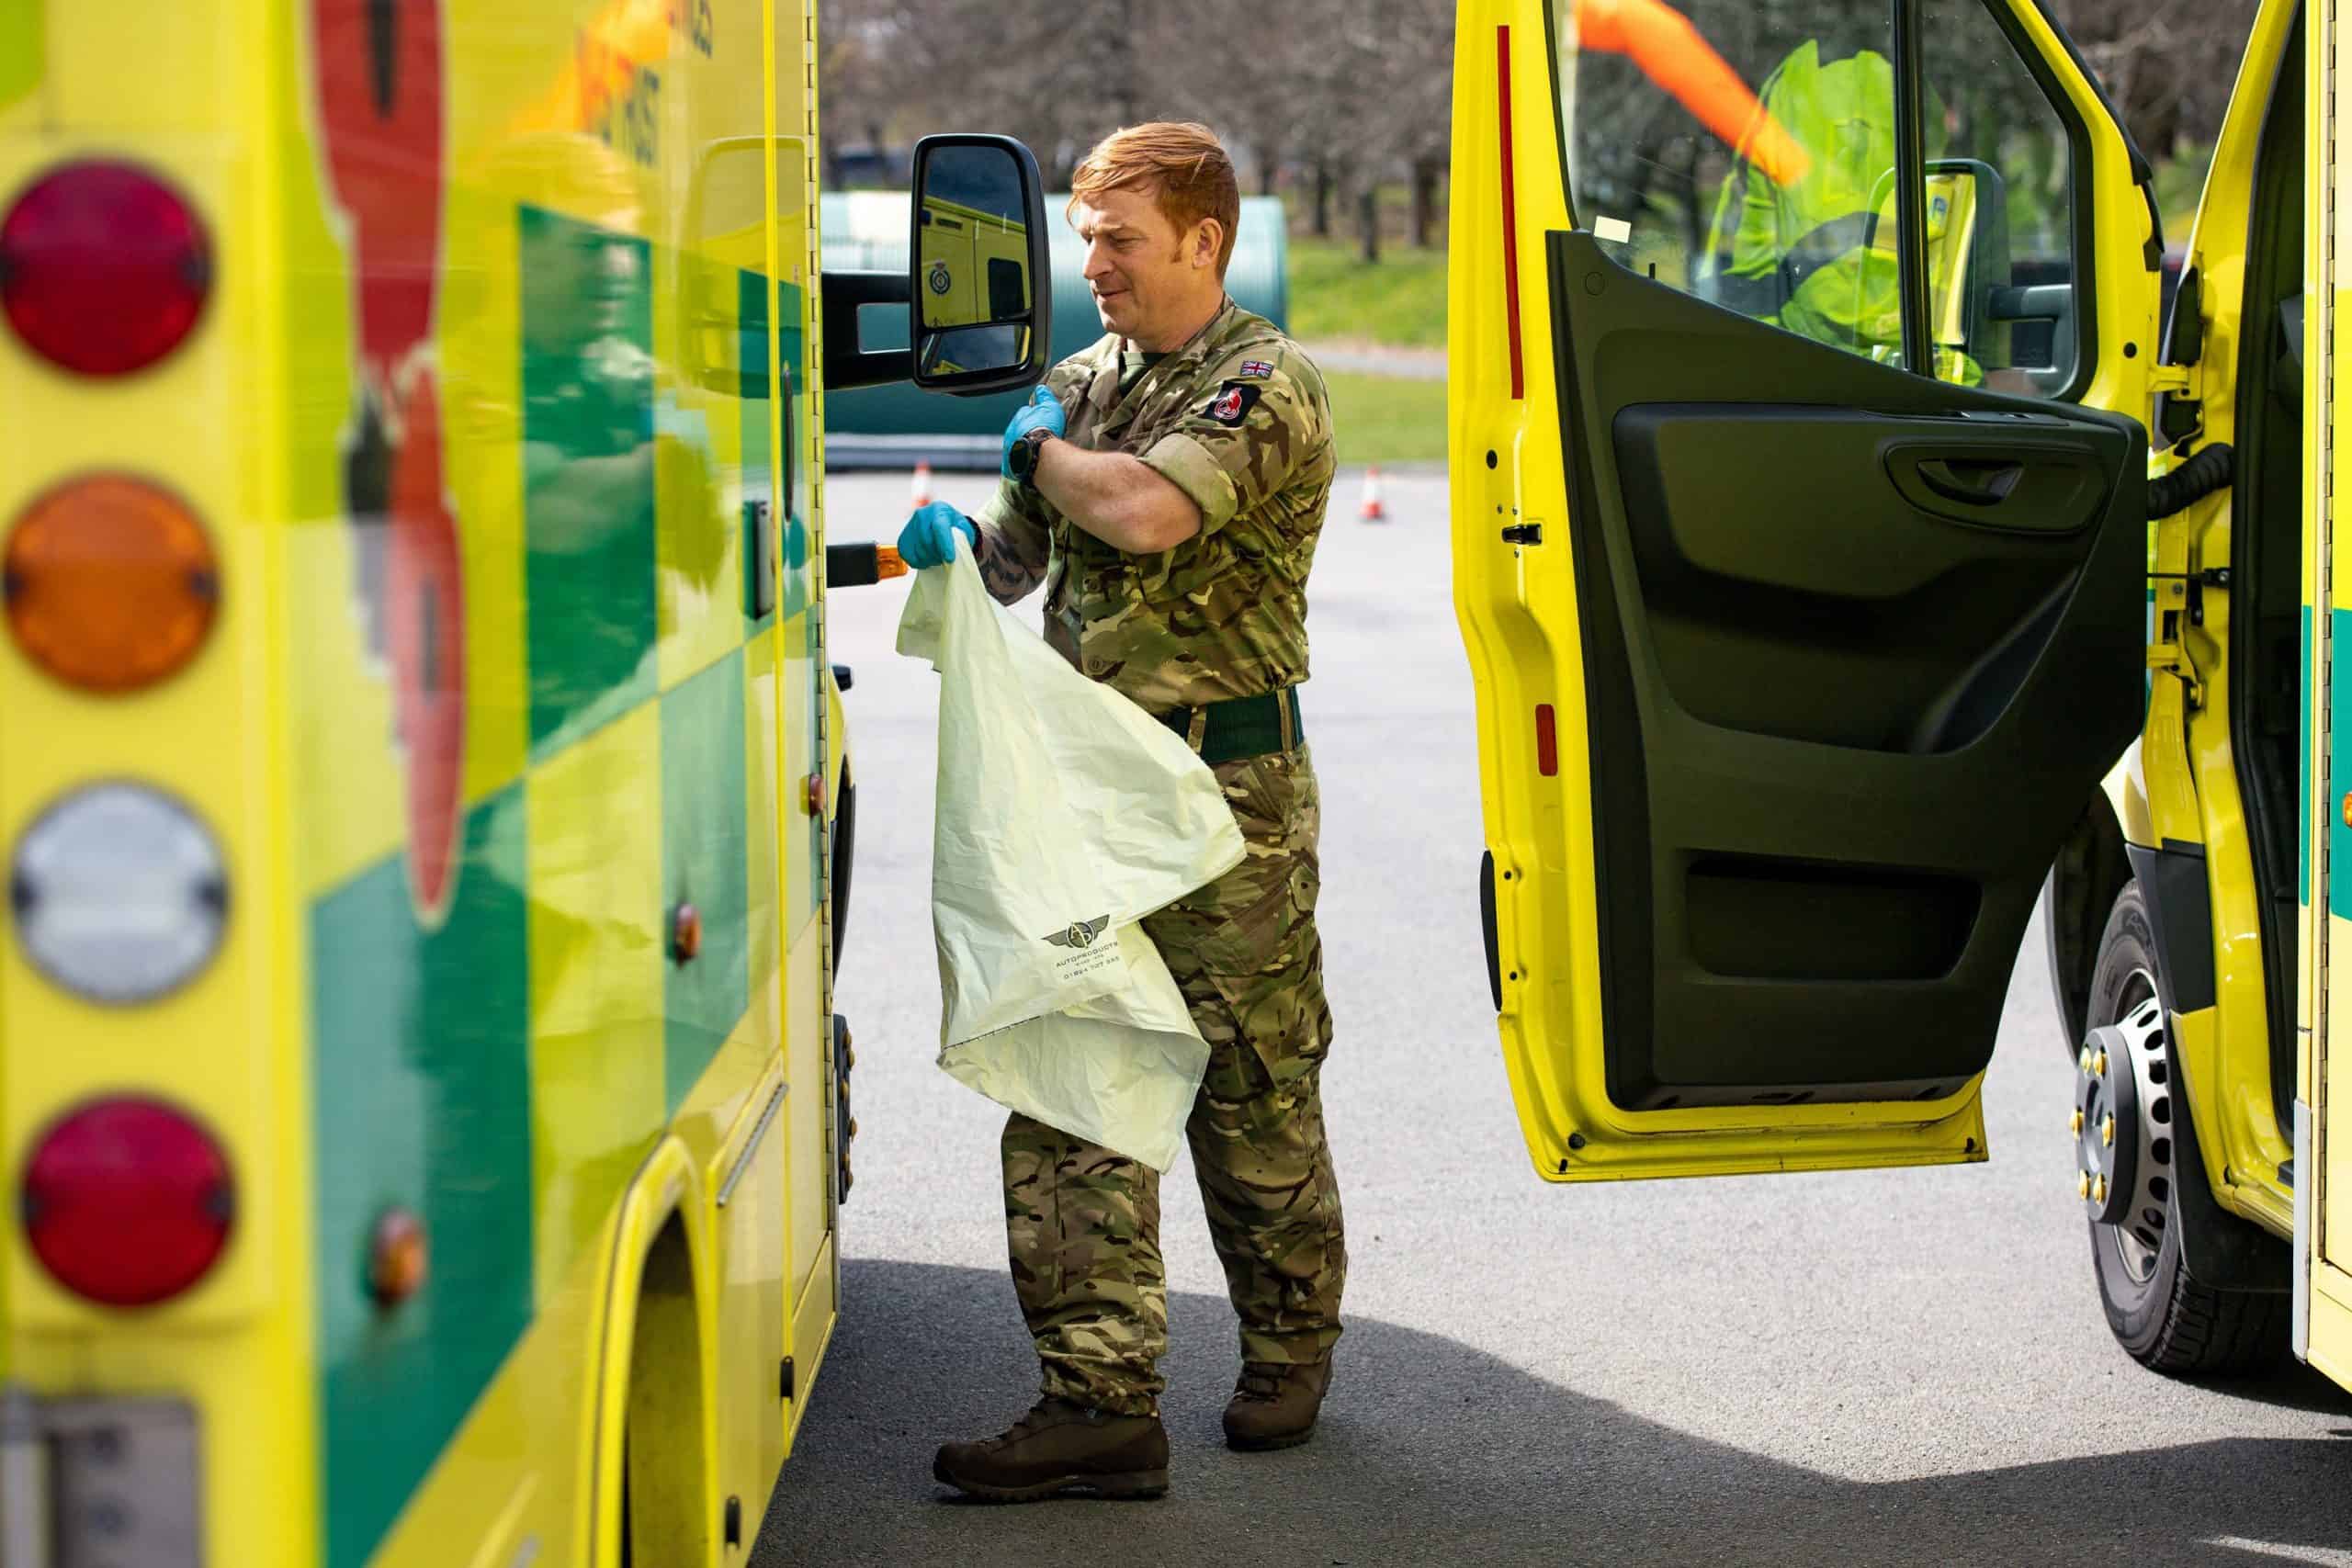 Soldiers to support ambulance service in Wales as new variant of Covid already spread around UK